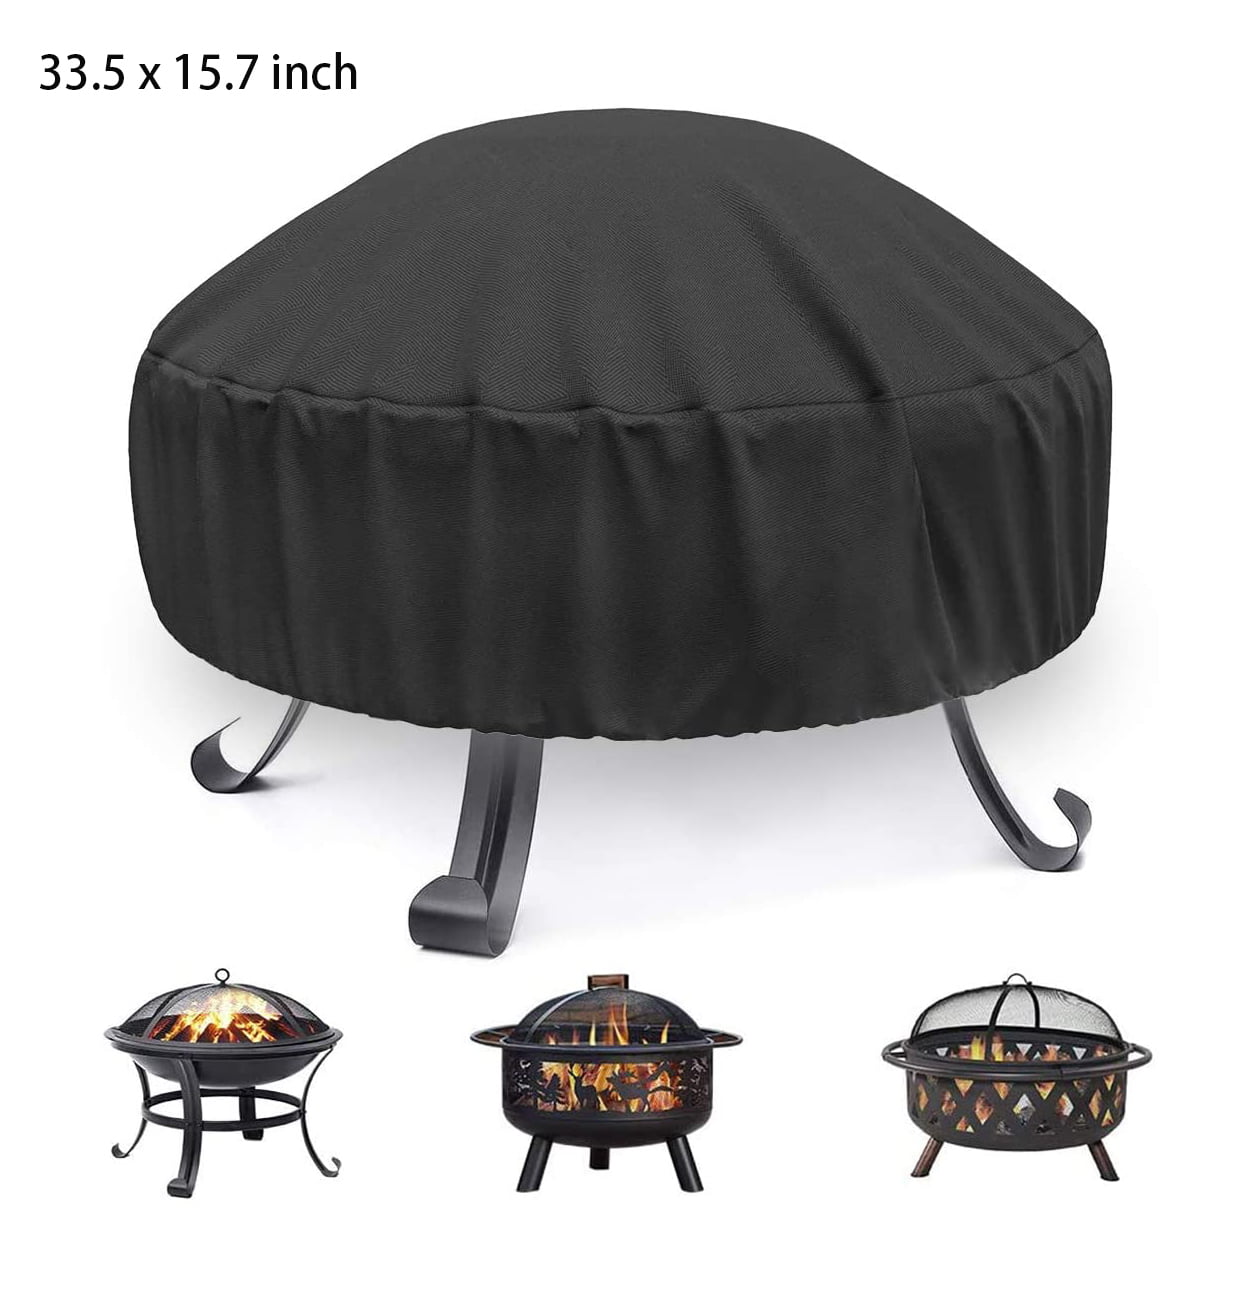 Multi-size Patio Round Fire Pit Cover Waterproof UV Protector Grill BBQ Cover 